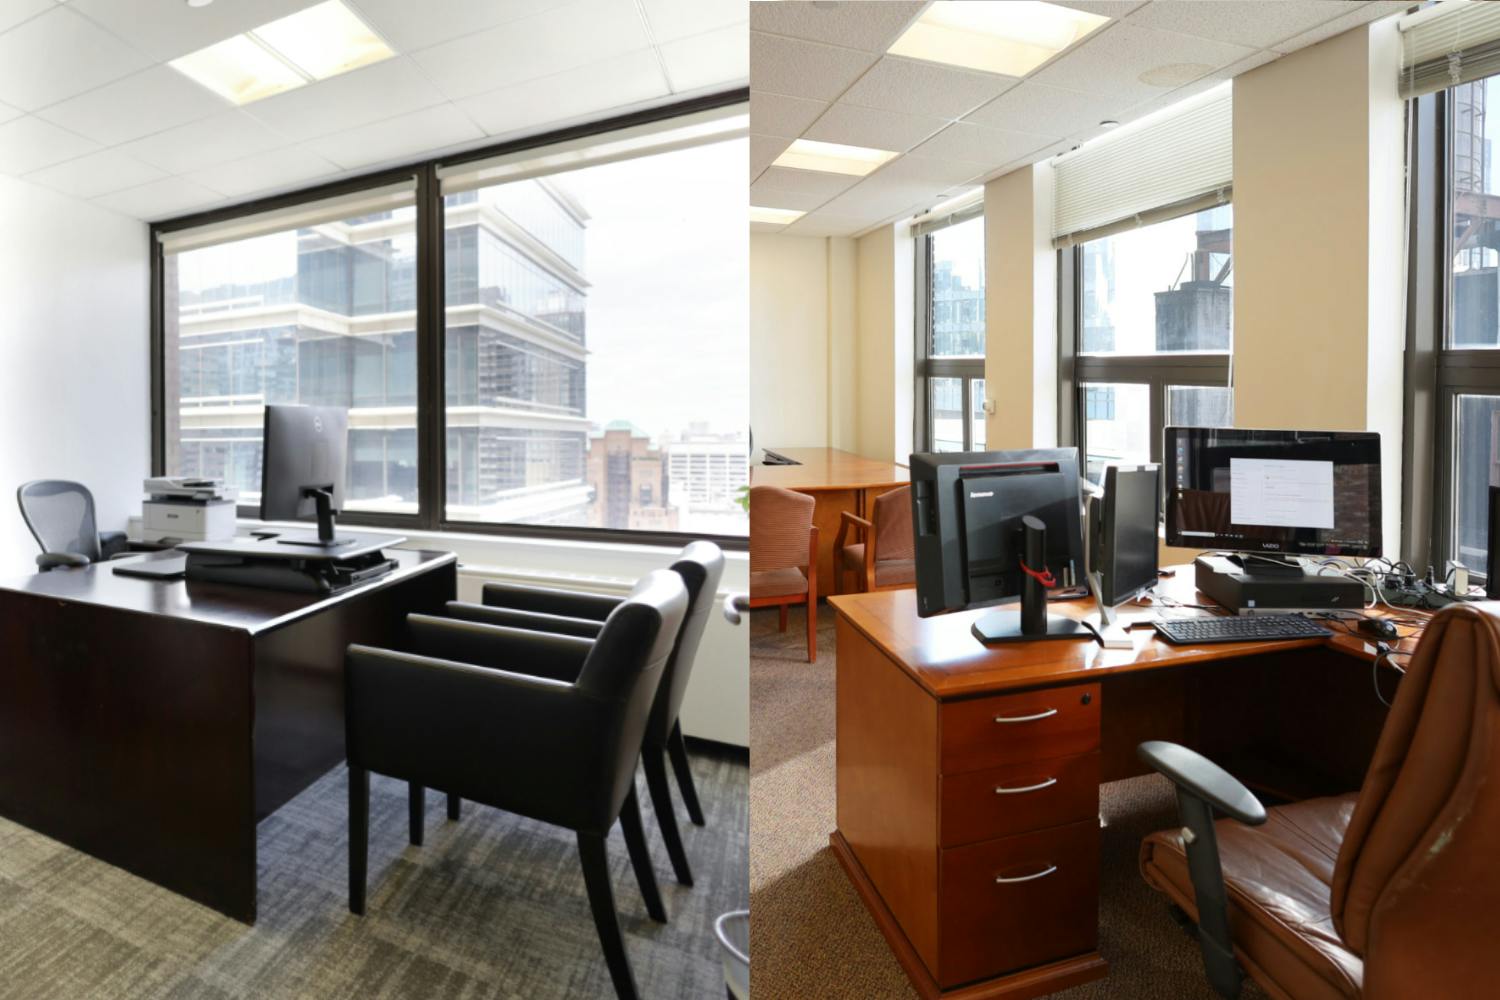 shared law firm sublease | office sublets